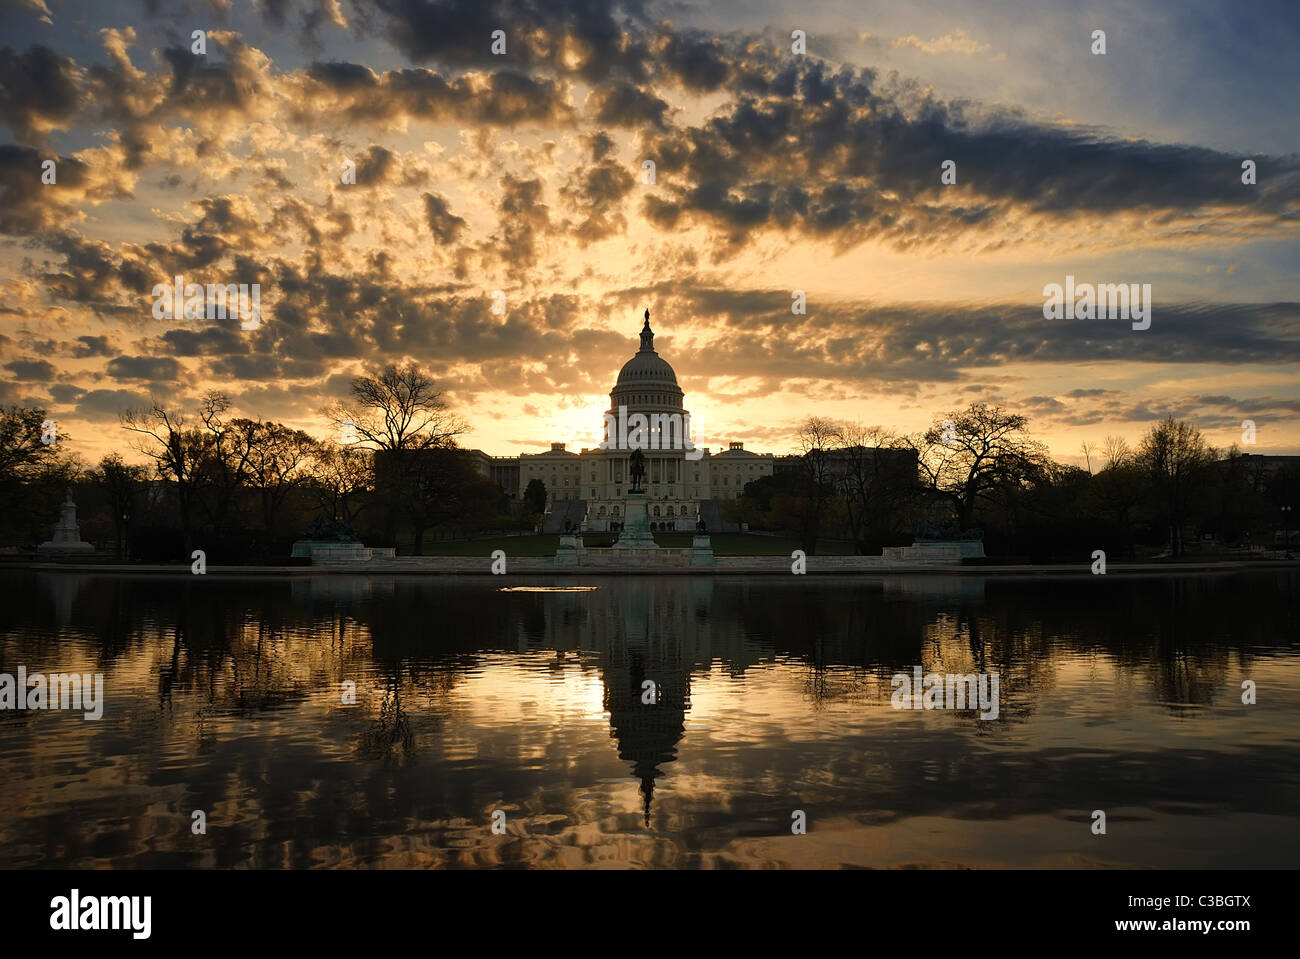 Capitol hill building in the morning with colorful cloud , Washington DC. Stock Photo